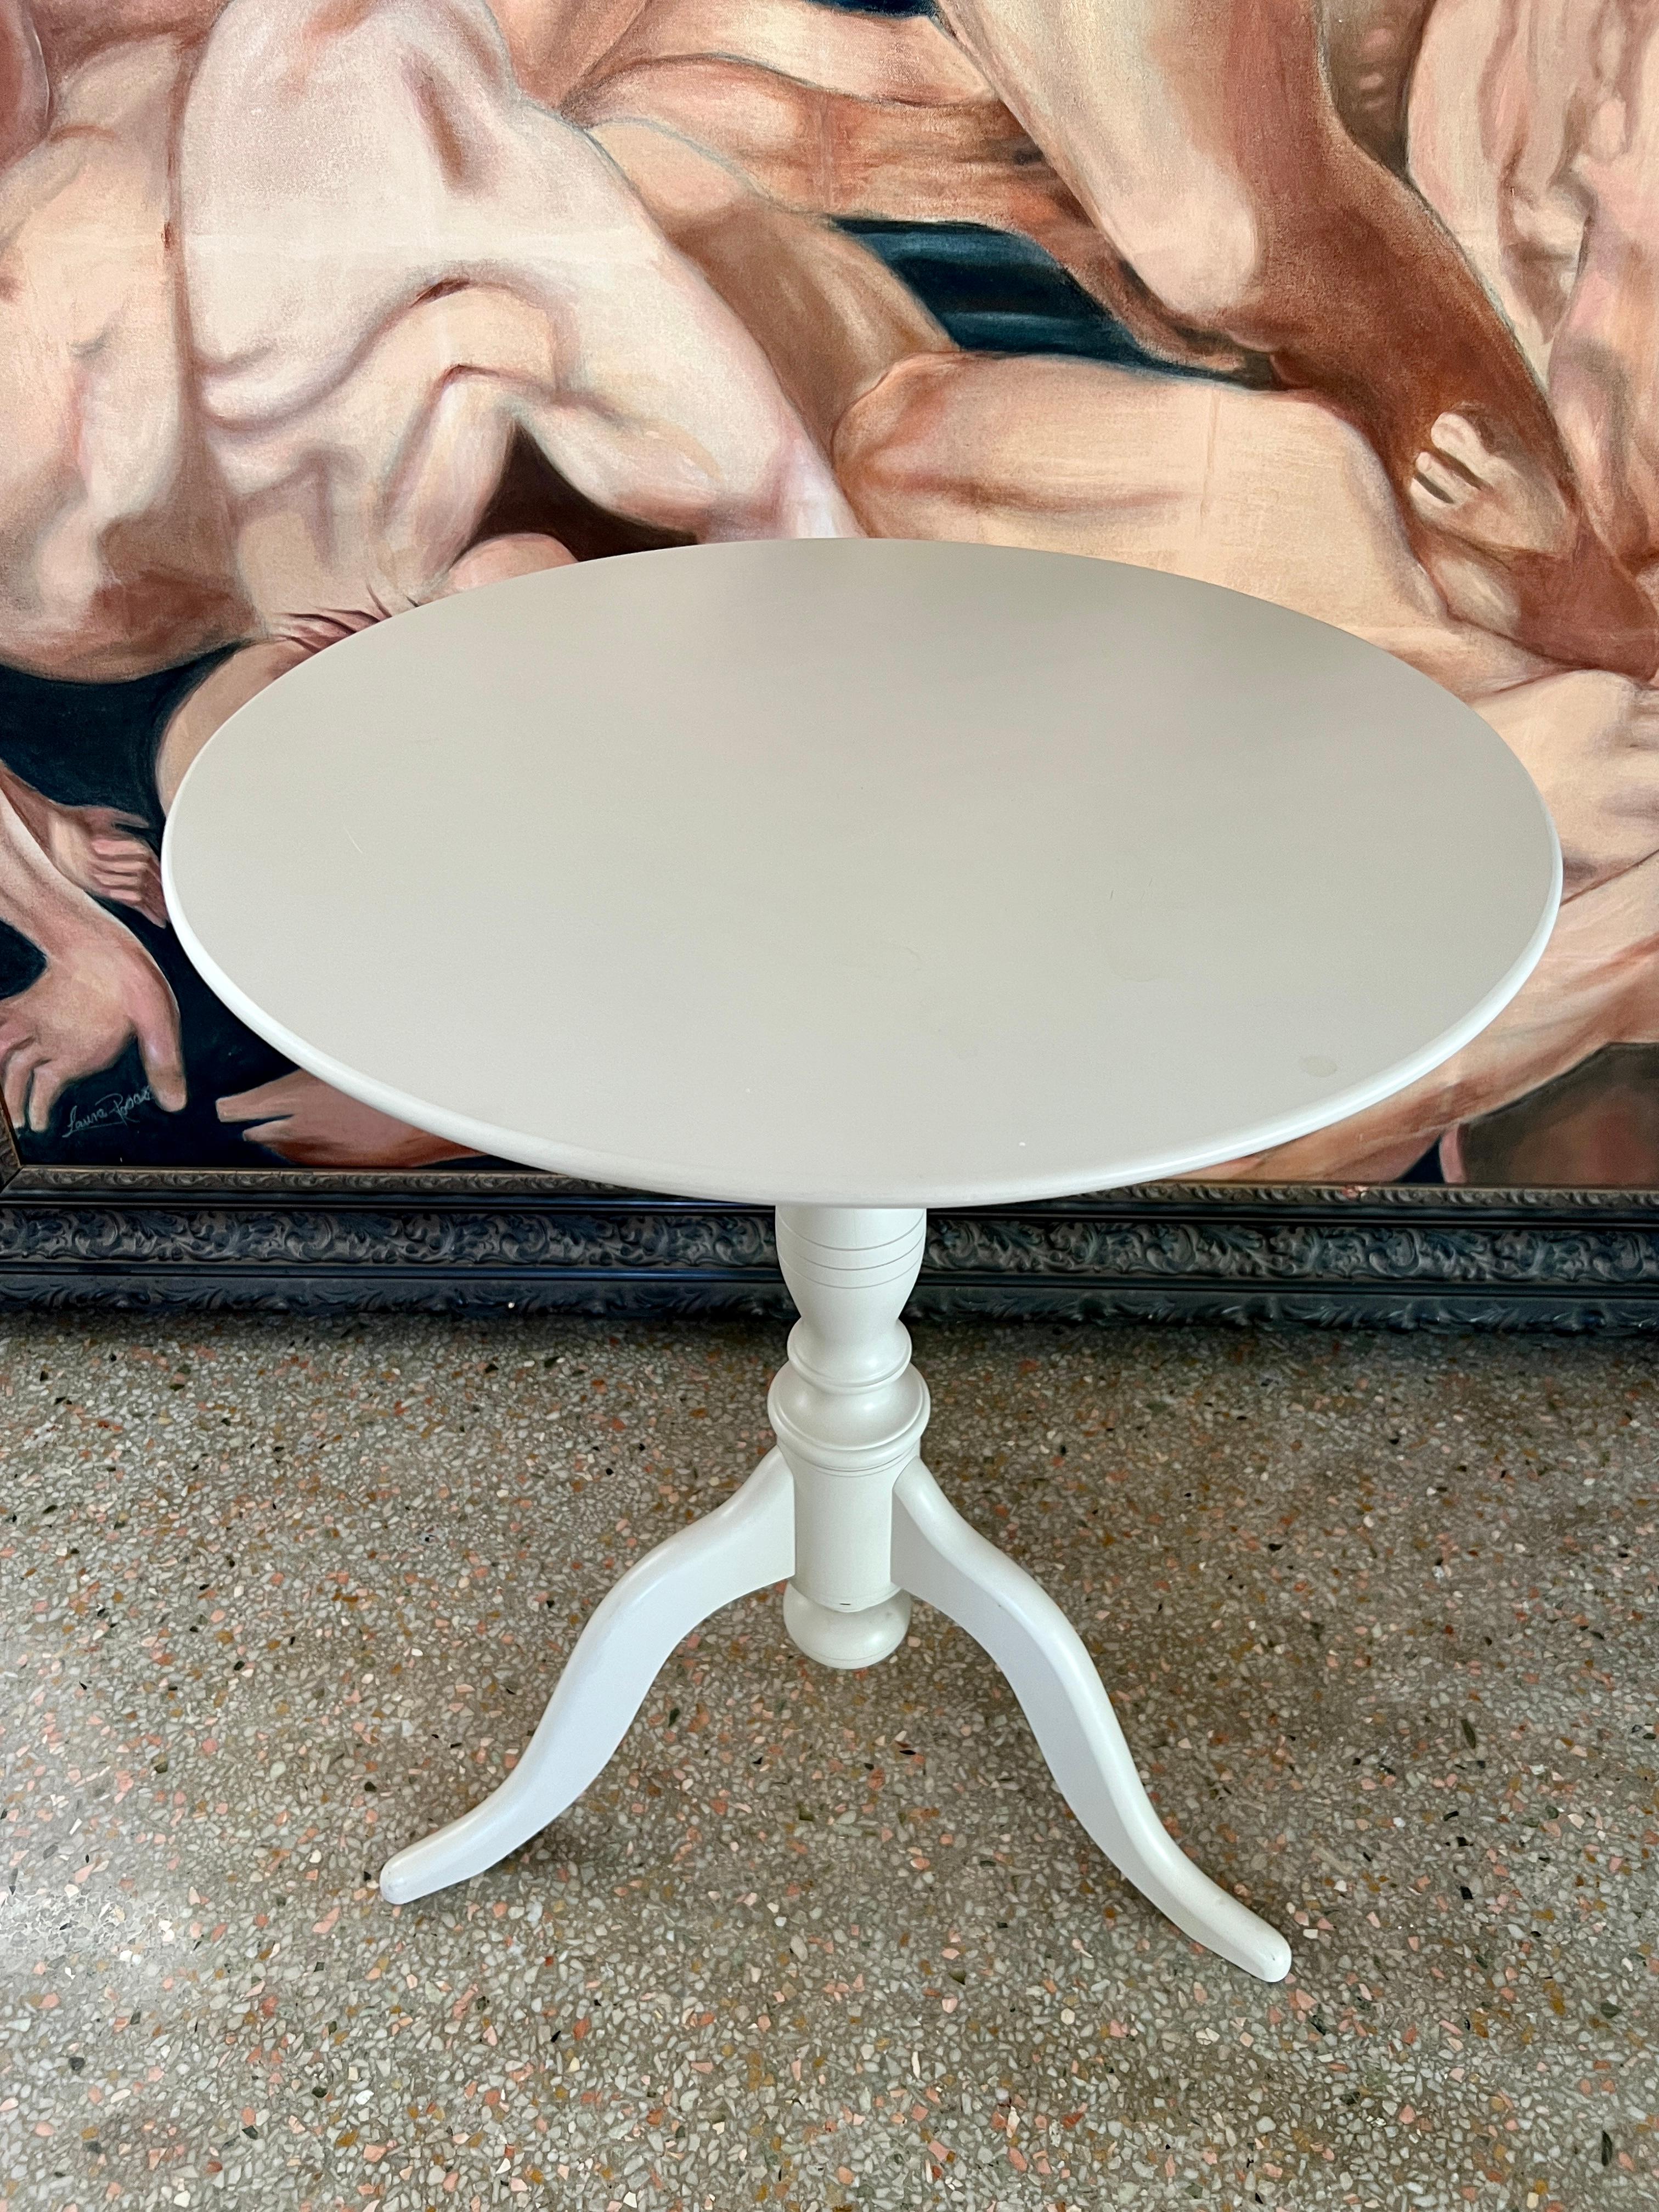 Swedish Gueridon Side Table with Tilt Top Design Hand Painted in Greige In Good Condition For Sale In Fort Lauderdale, FL